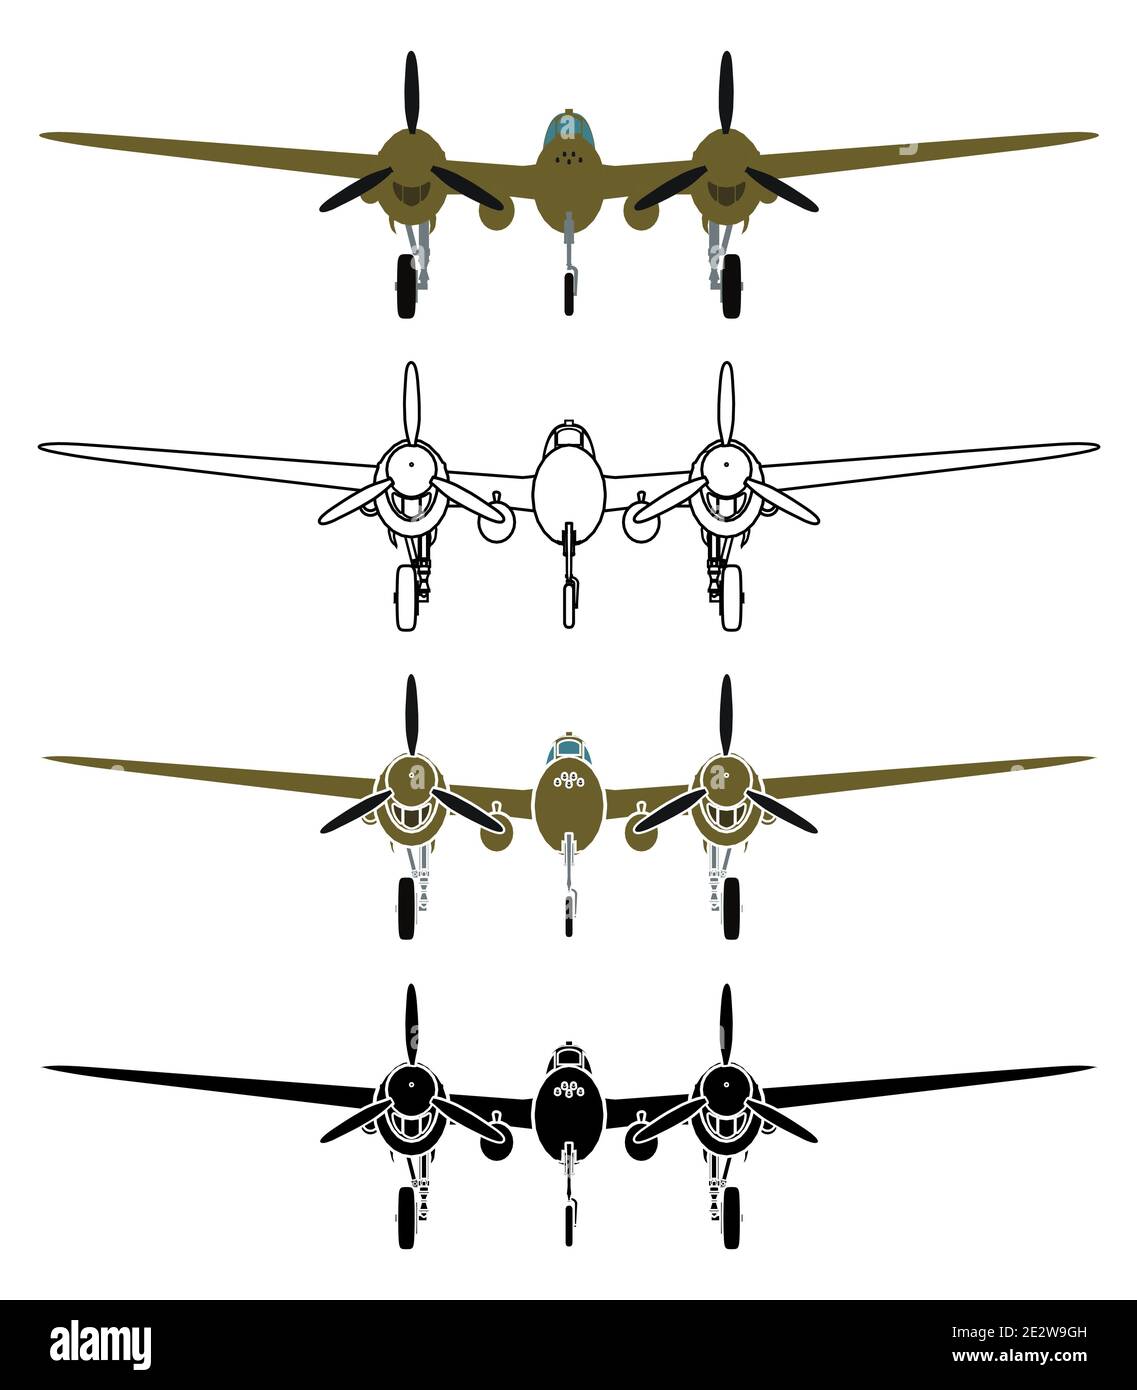 P38 Lightning in front view Stock Vector